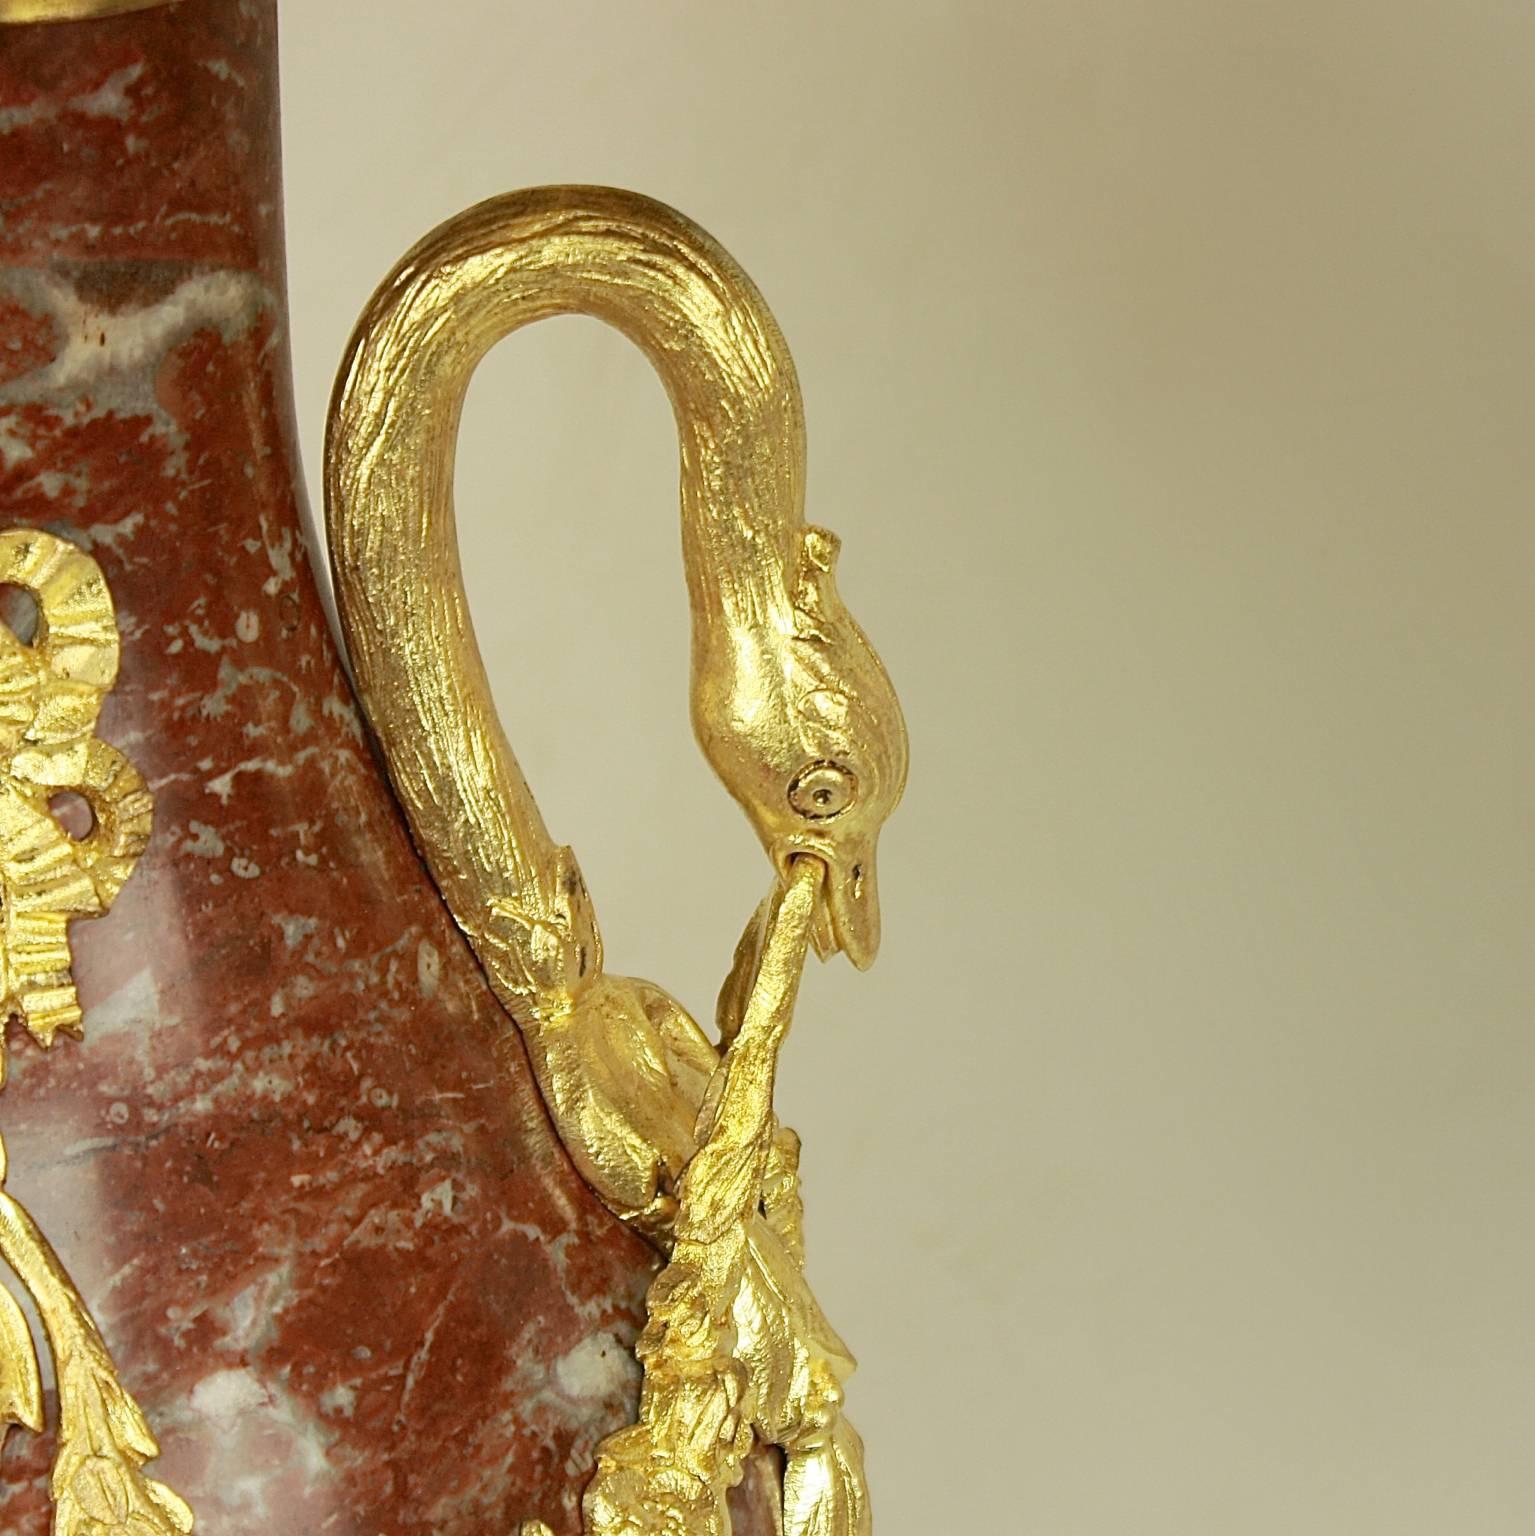 Pair of 19th century Louis XVI style solid 'royal rouge' marble and gilt bronze-mounted baluster-shaped table lamps. The finely chiseled and well-proportioned gilt bronze applications decorated with detailed ornamentation. Attached to the narrow